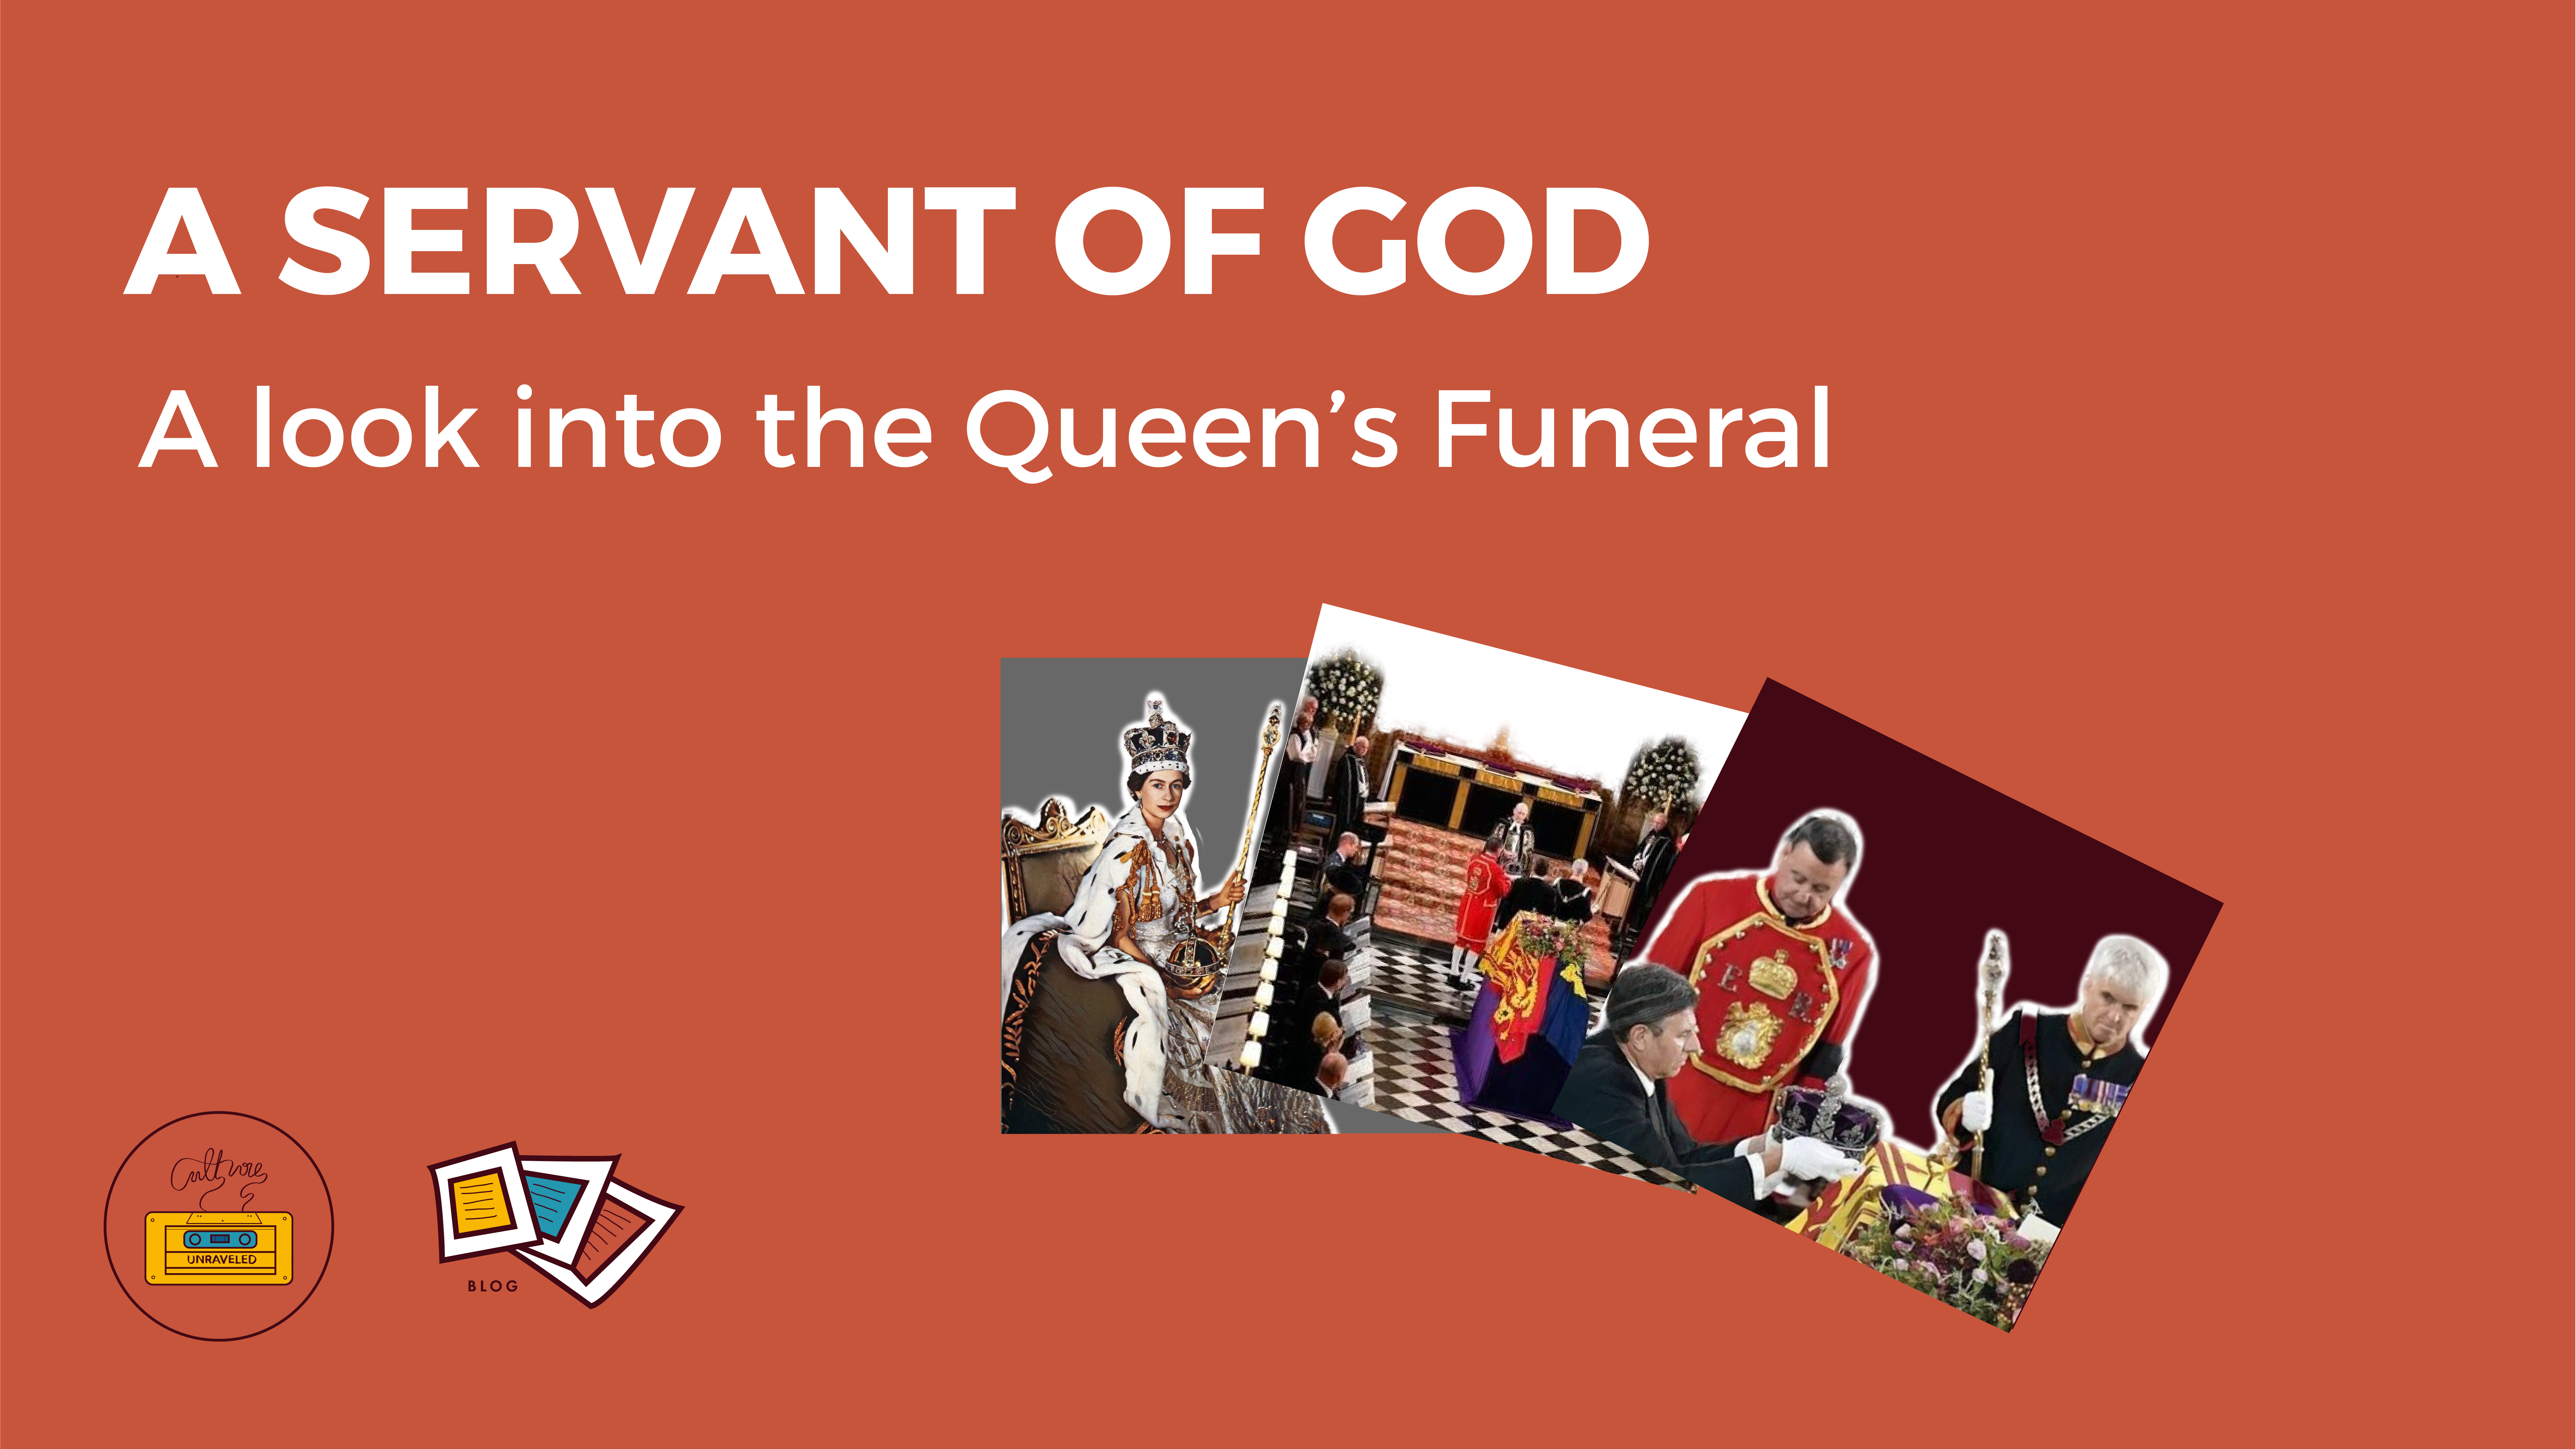 A Servant of God. A Look into the Queen’s Funeral